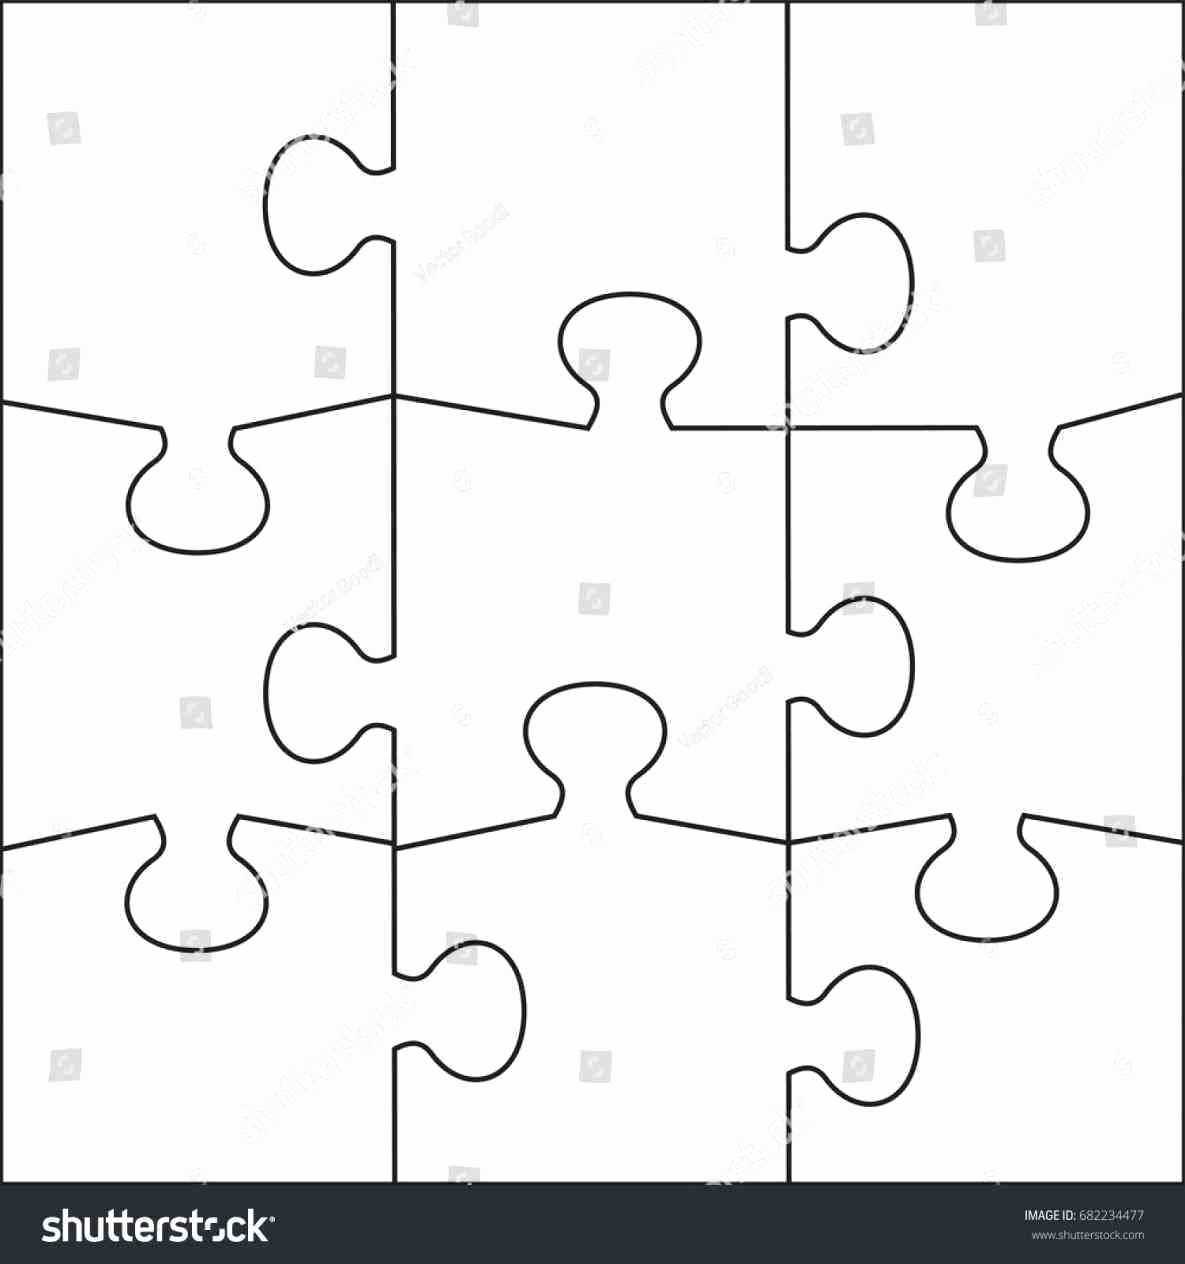 Puzzle Pieces Template For Word Fresh 9 Piece Jigsaw Puzzle Inside Jigsaw Puzzle Template For Word